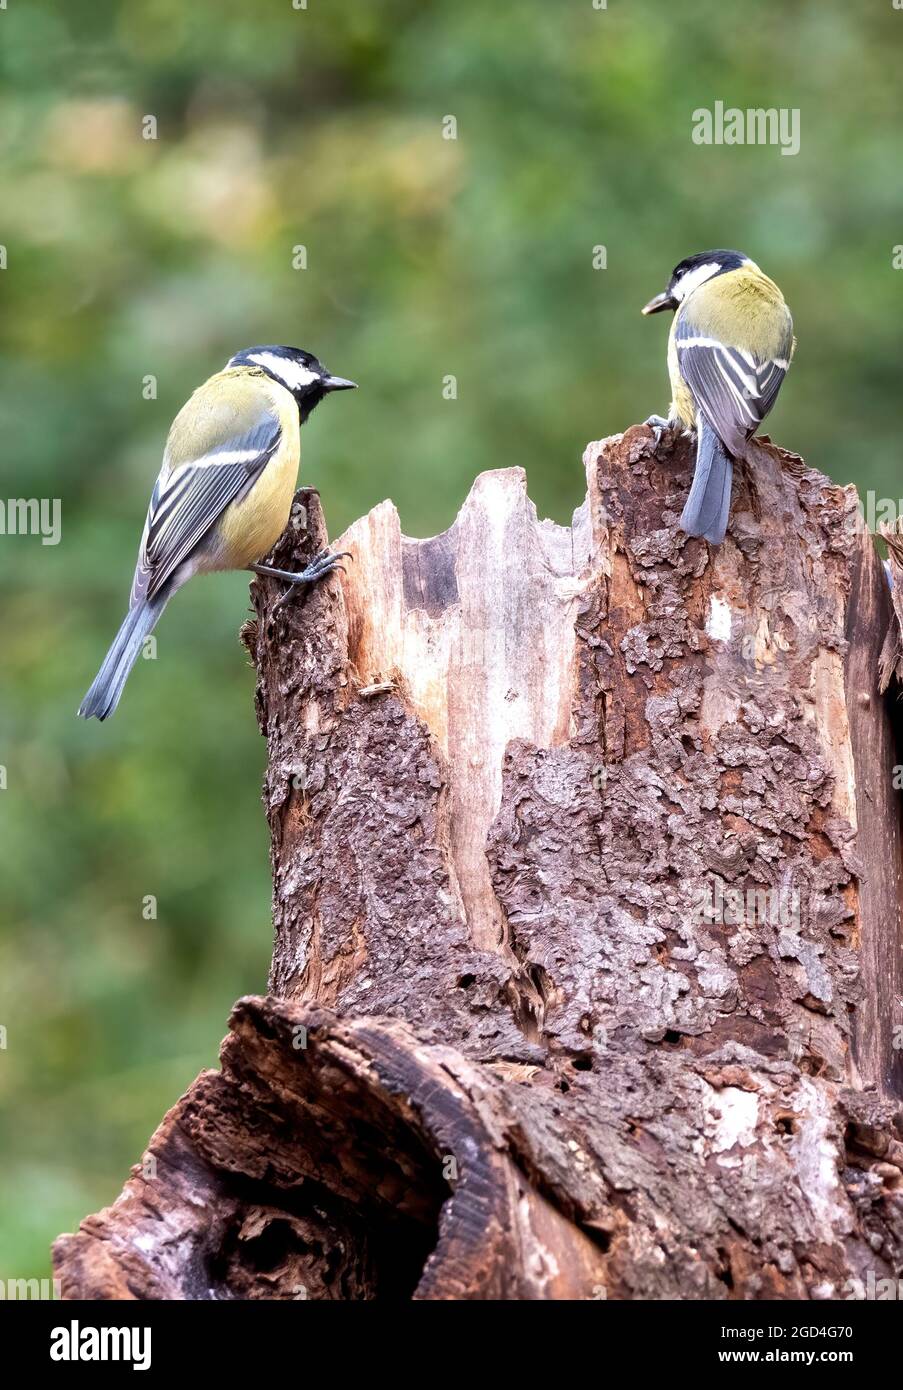 Great Tit (Parus major aphrodite), 2 adults perched on a trunk Stock Photo